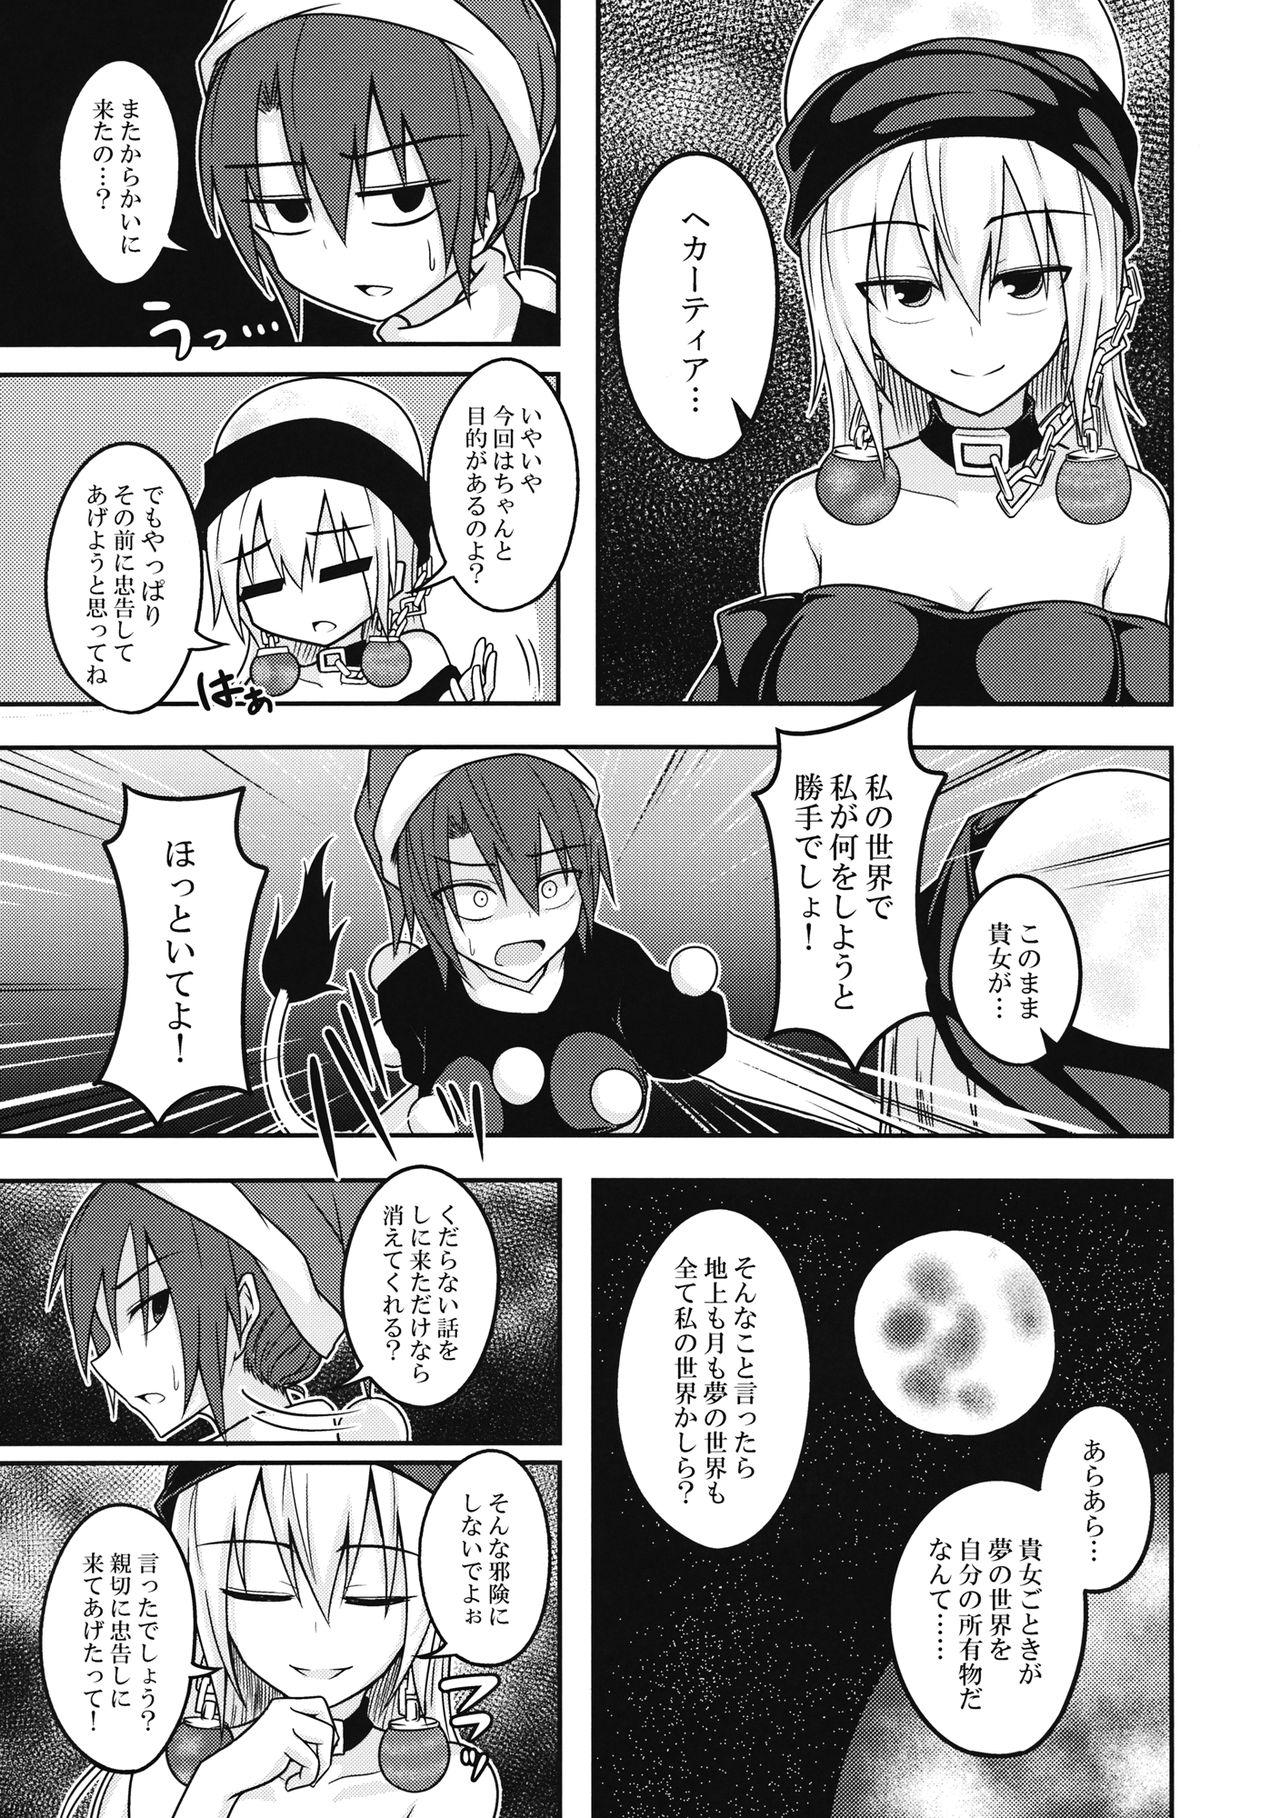 Snatch Yume no Torikago - Touhou project Publico - Page 14